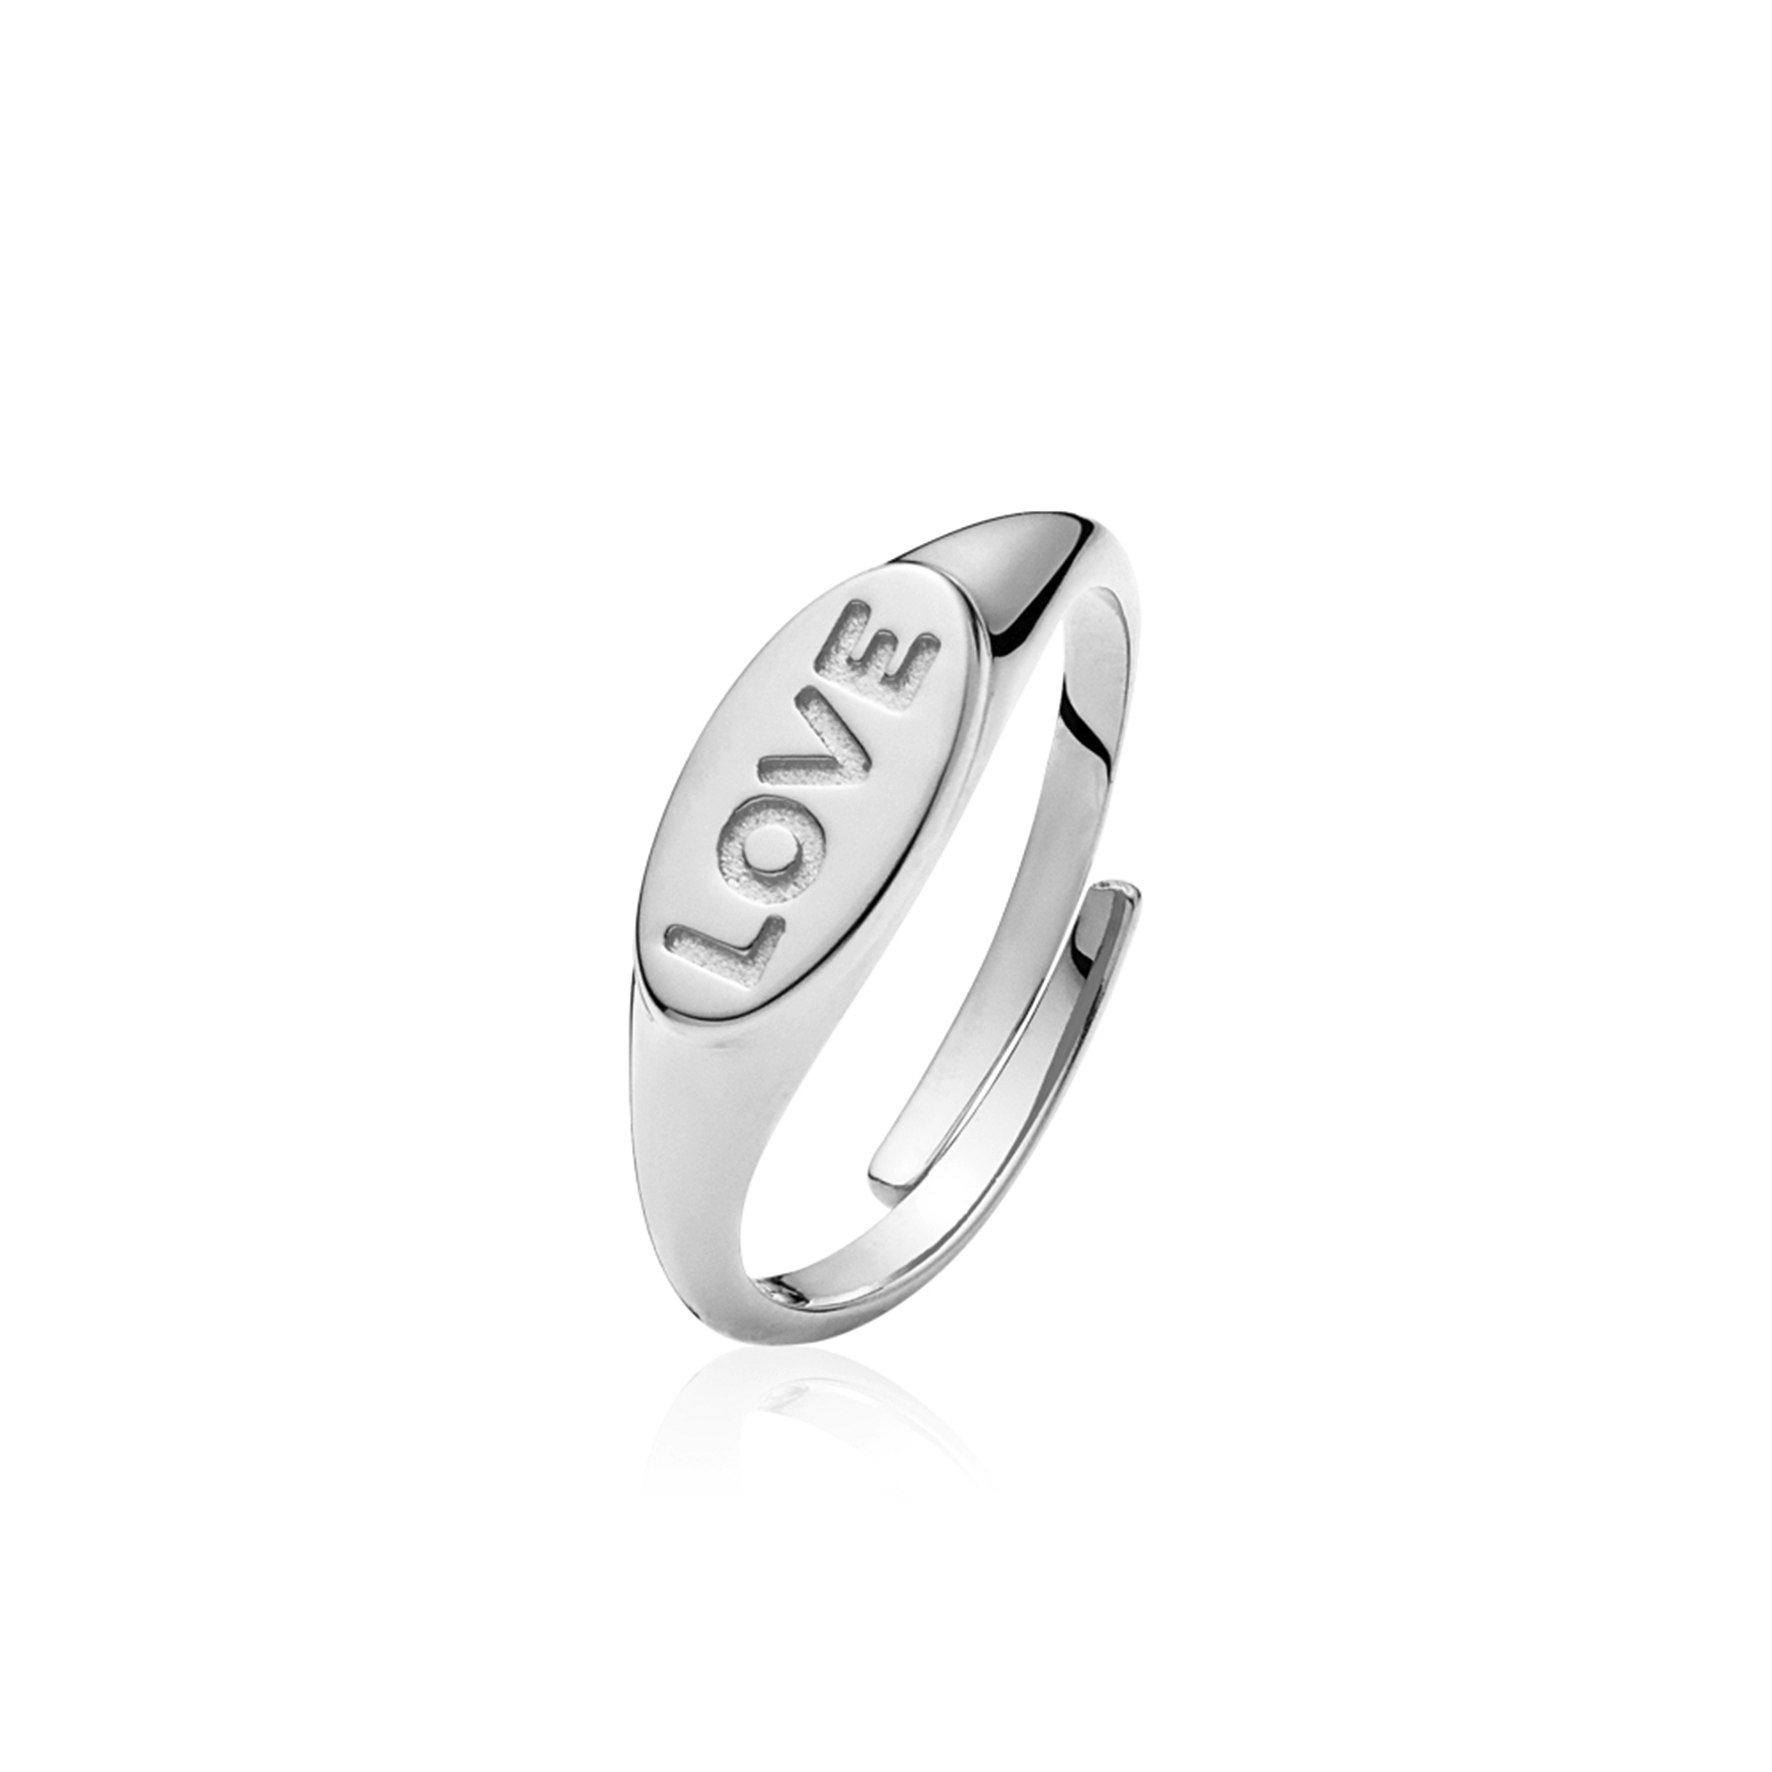 Fam Love Ring from Sistie in Silver Sterling 925